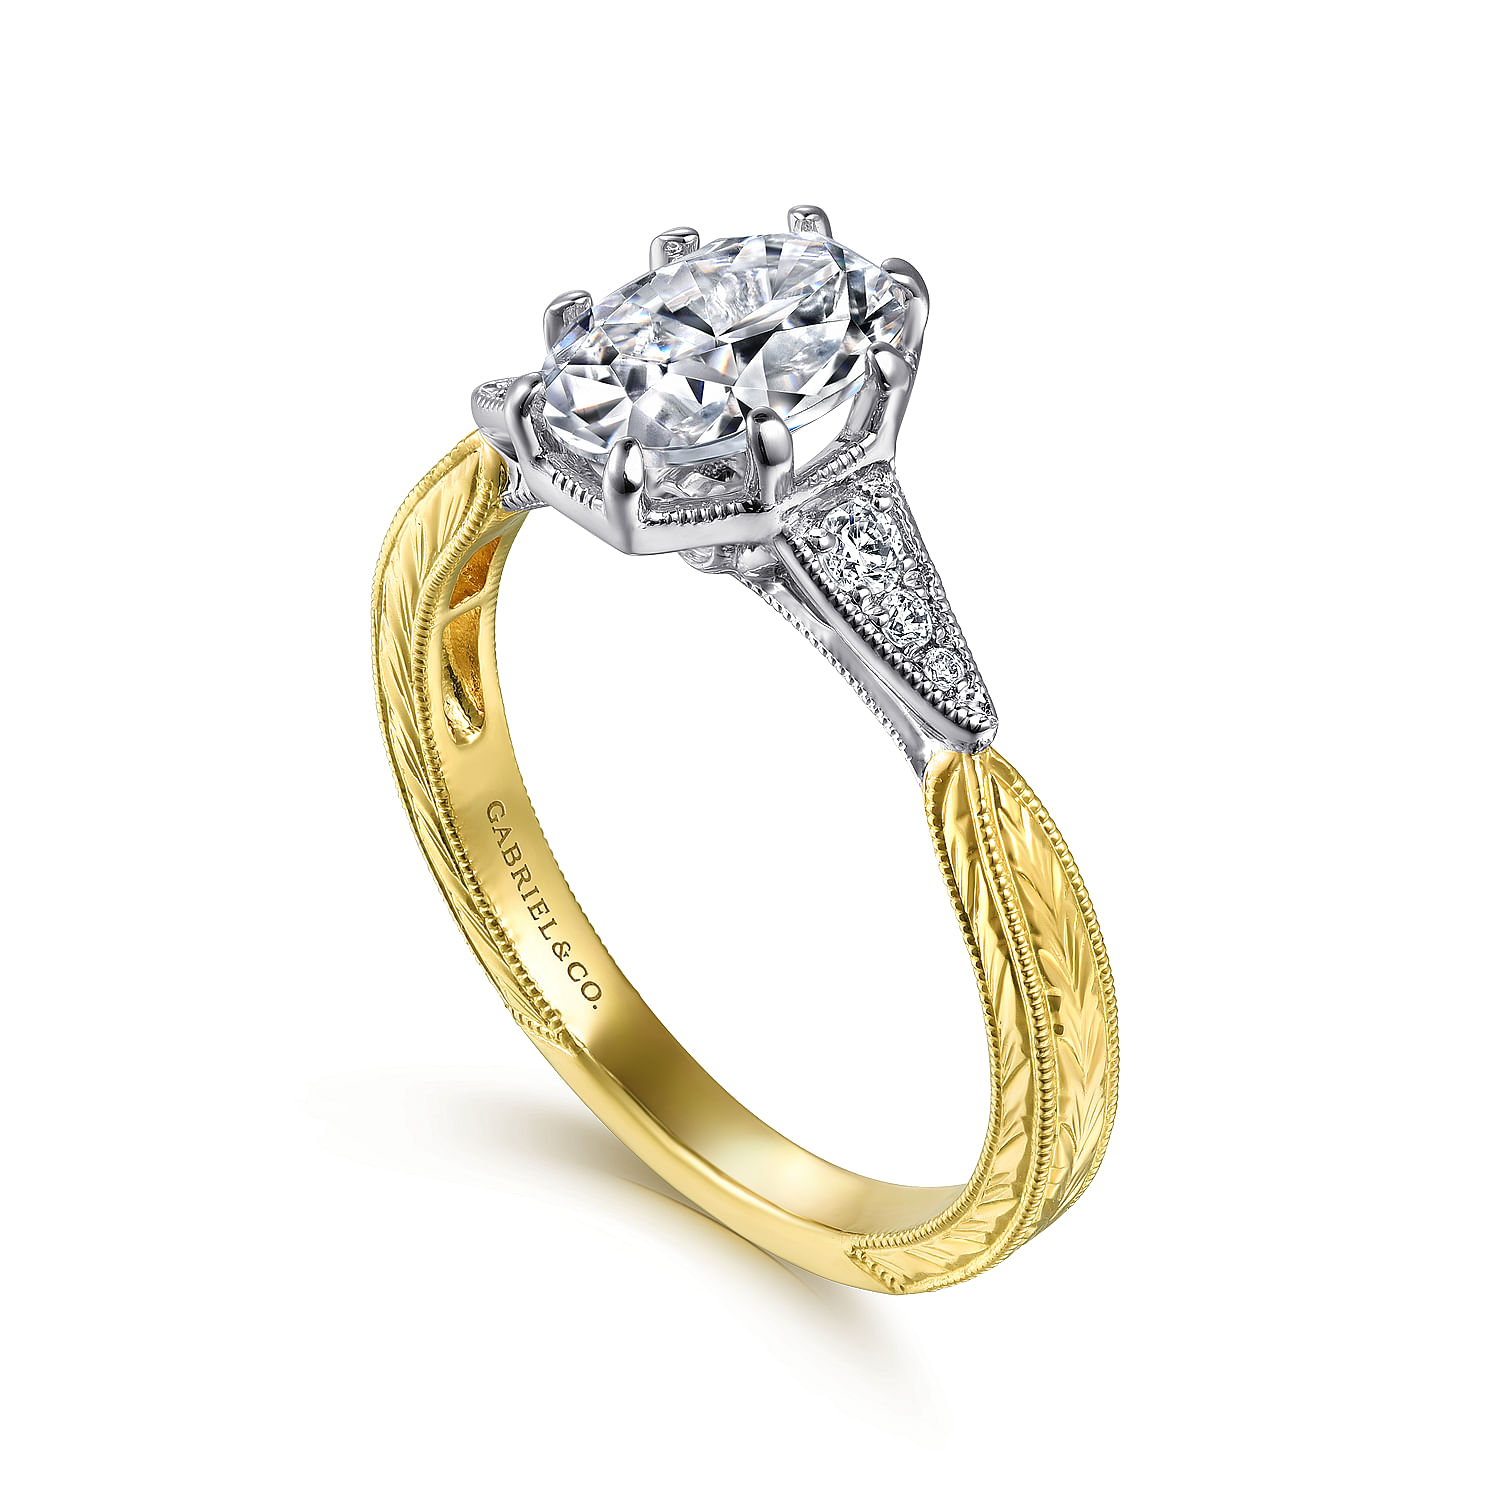 Vintage Inspired 14K White-Yellow Gold Oval Diamond Engagement Ring